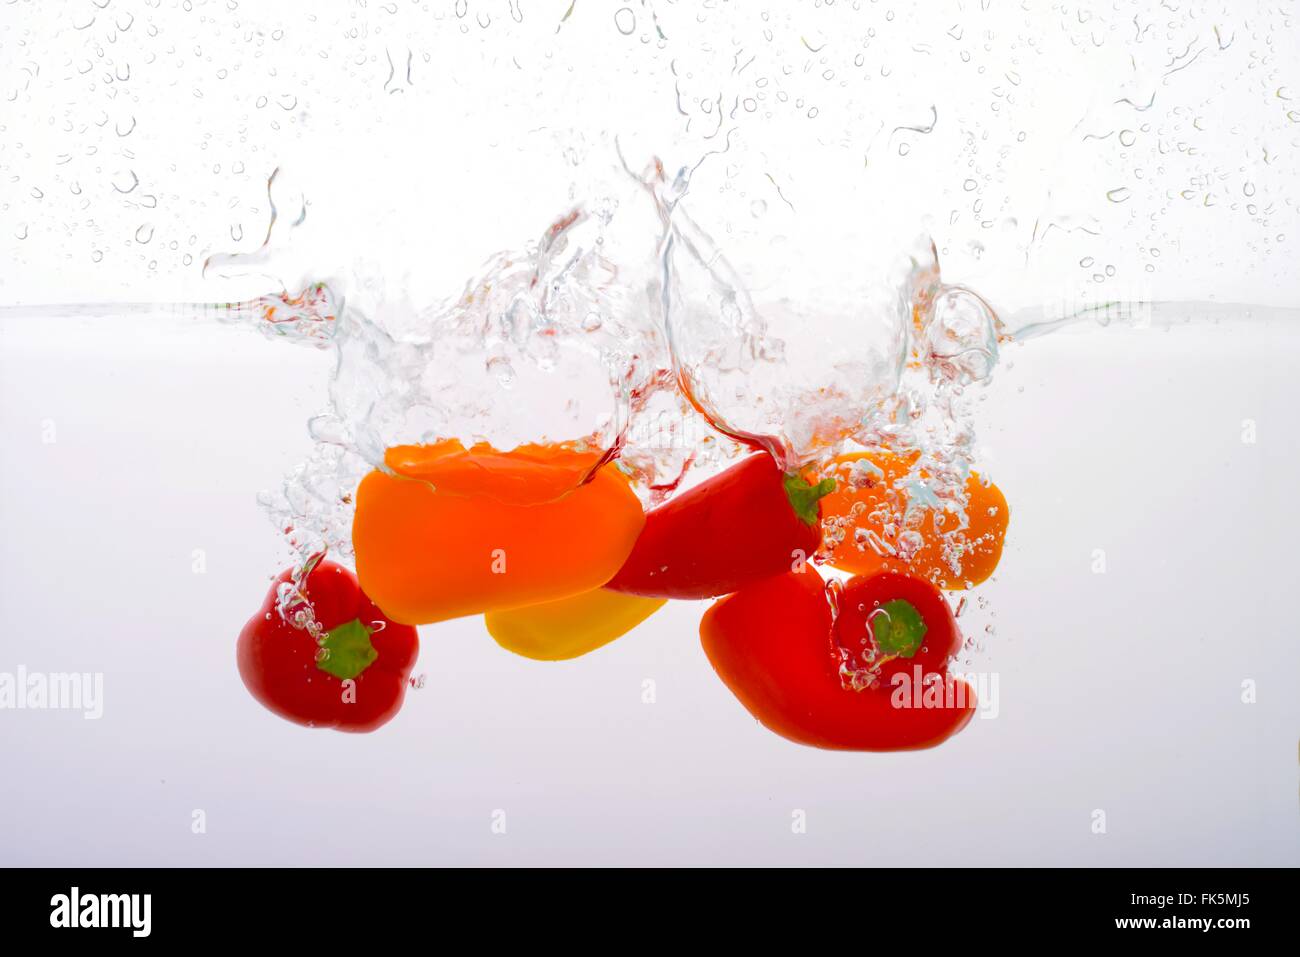 Small Peppers smashed into Water Stock Photo